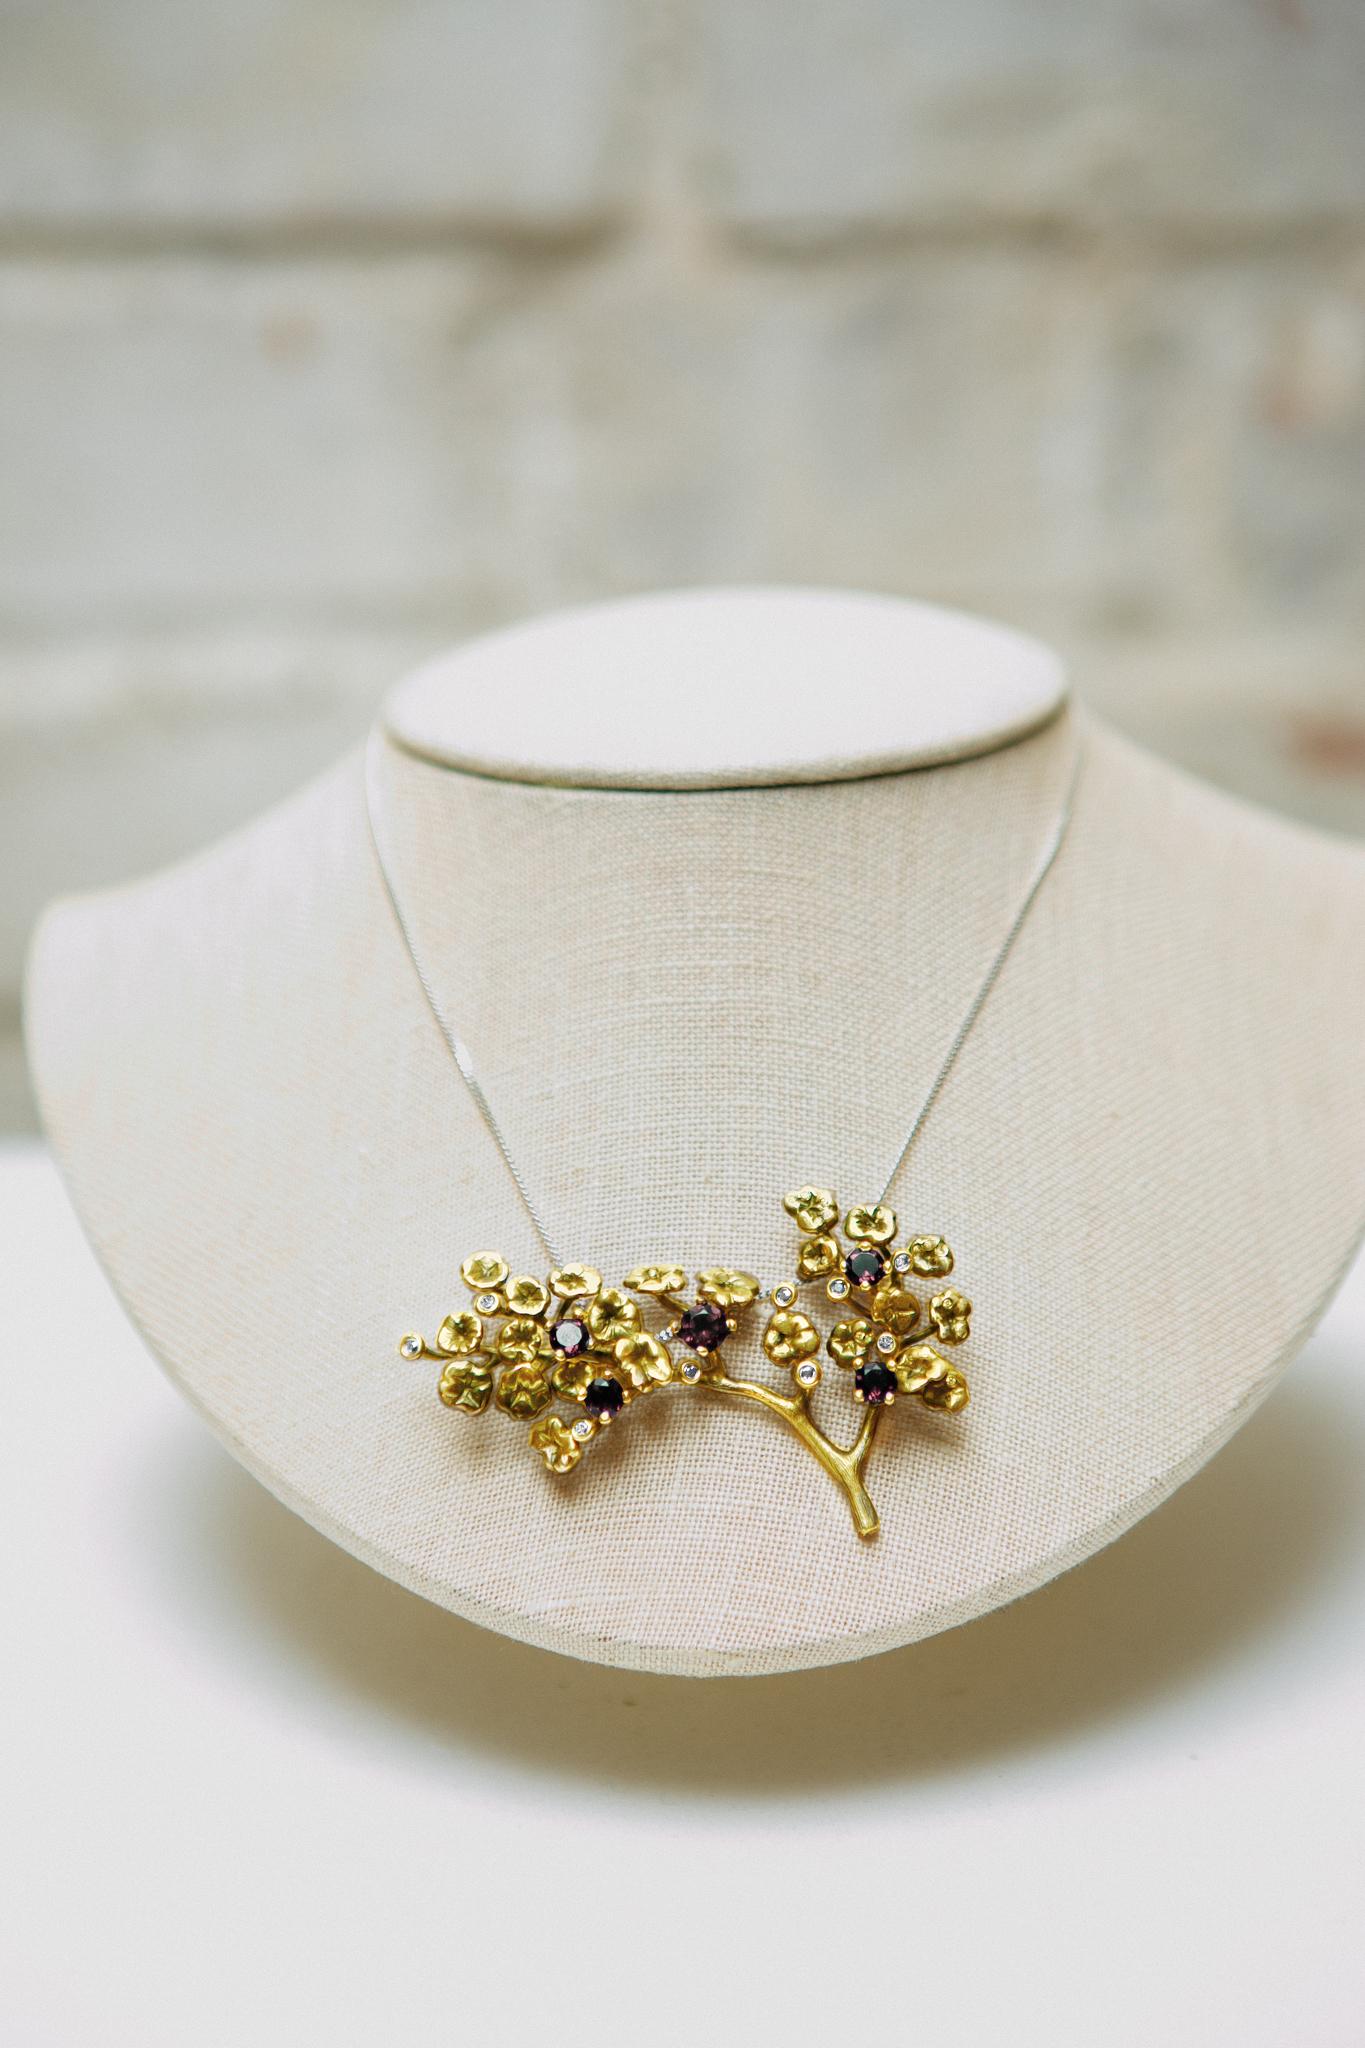 This 18 karat yellow gold Heliotrope necklace is a jewellery art object designed by oil painter Polya Medvedeva from Berlin.

Encrusted with 16 diamonds and 14 natural storm purple spinels (5.8 carata in total), this necklace measures 7 cm long and